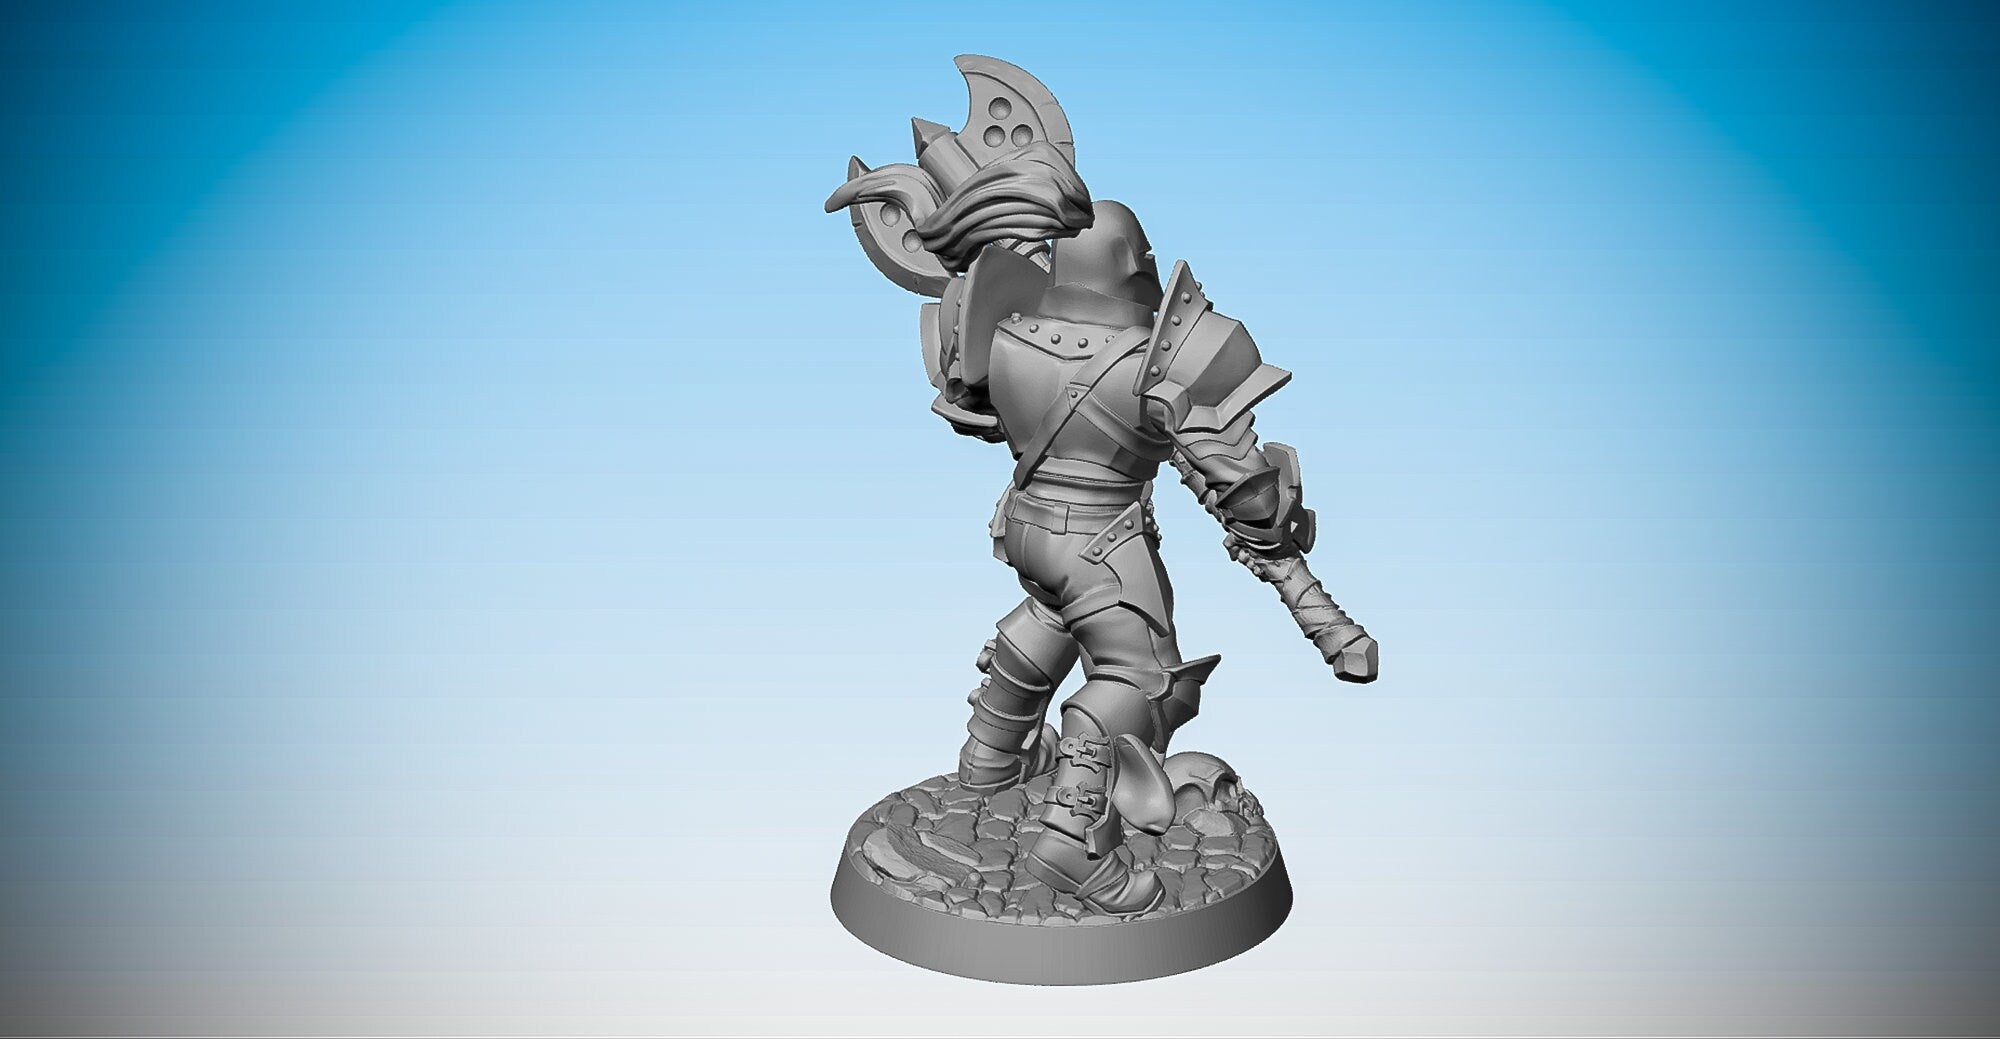 WARRIOR with HELMET "Greataxe" | Dungeons and Dragons | DnD | Pathfinder | Tabletop | RPG | Hero Size | 28 mm-Role Playing Miniatures